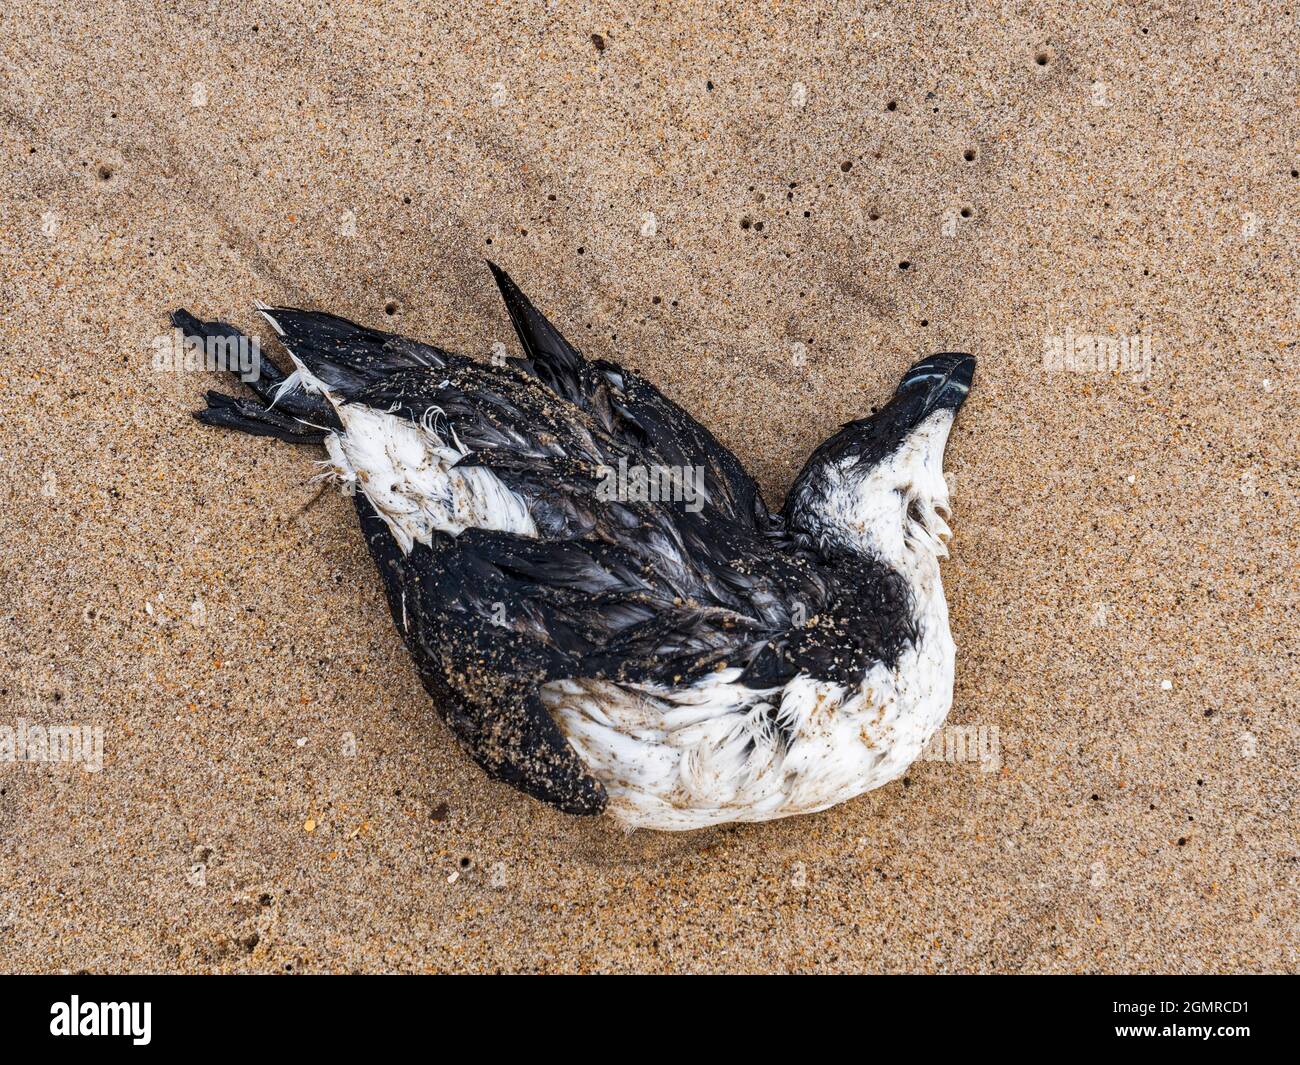 Cambois, Northumberland, 18th September 2021, unusual amount of seabird deaths in razorbiil and guillemot populations along the coast. Gaul NE News/ Alamy News Stock Photo